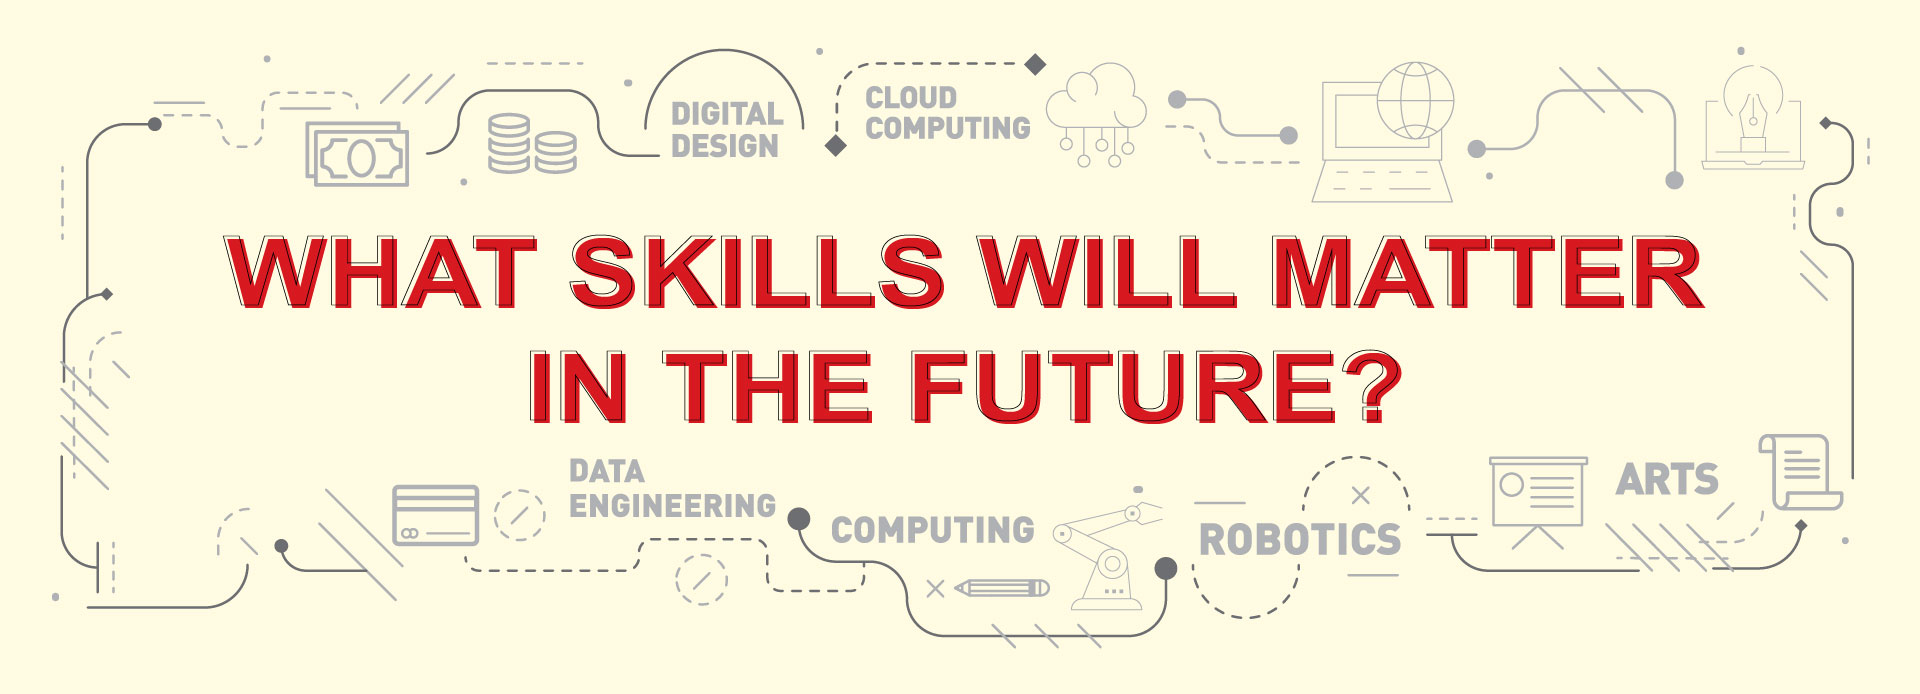 What skills will matter in the future?